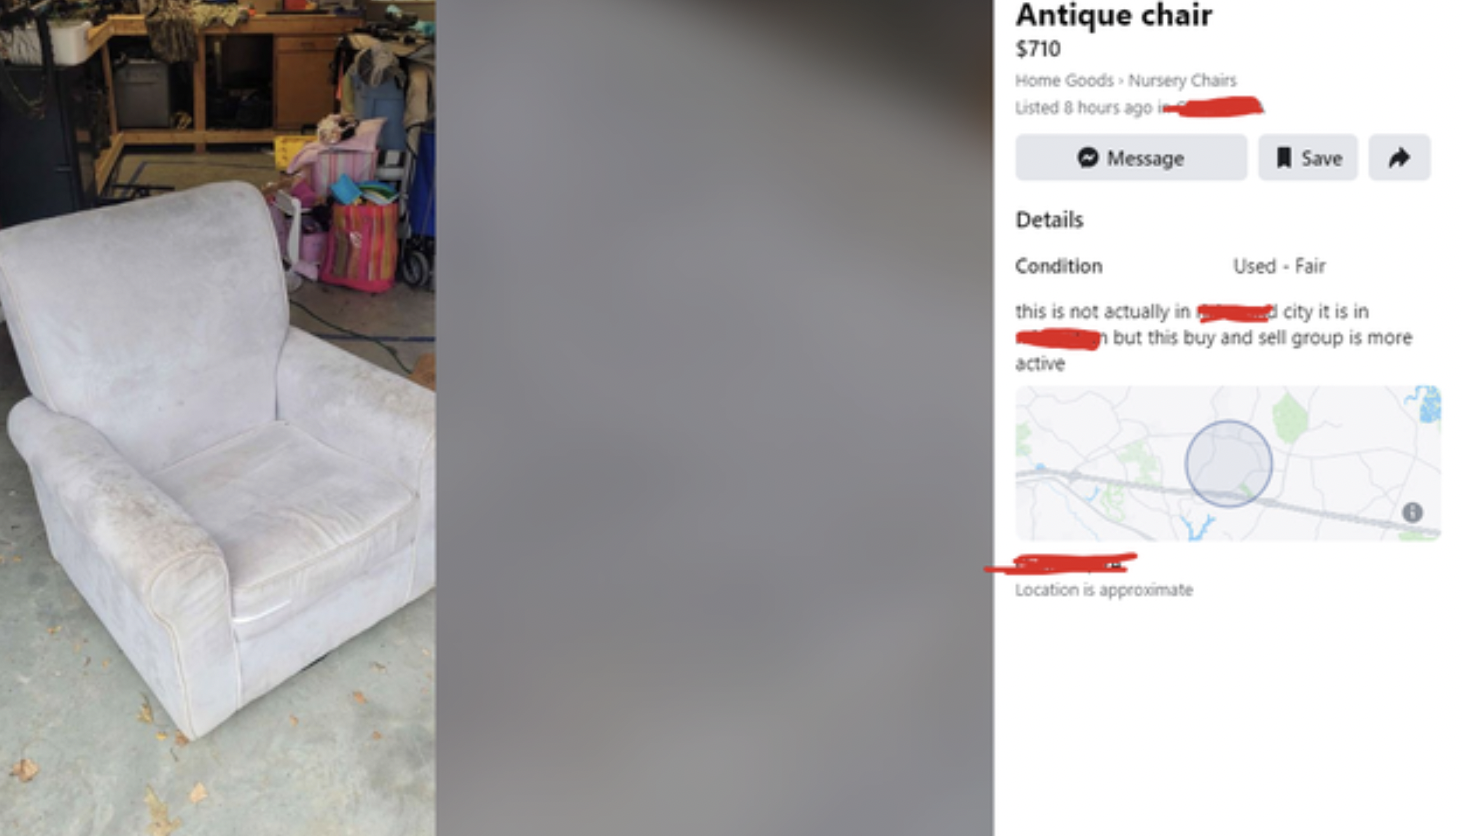 Insane People of Facebook - $710 Home Goods Nursery Chairs Listed ir city it is in but this buy and sell group is more